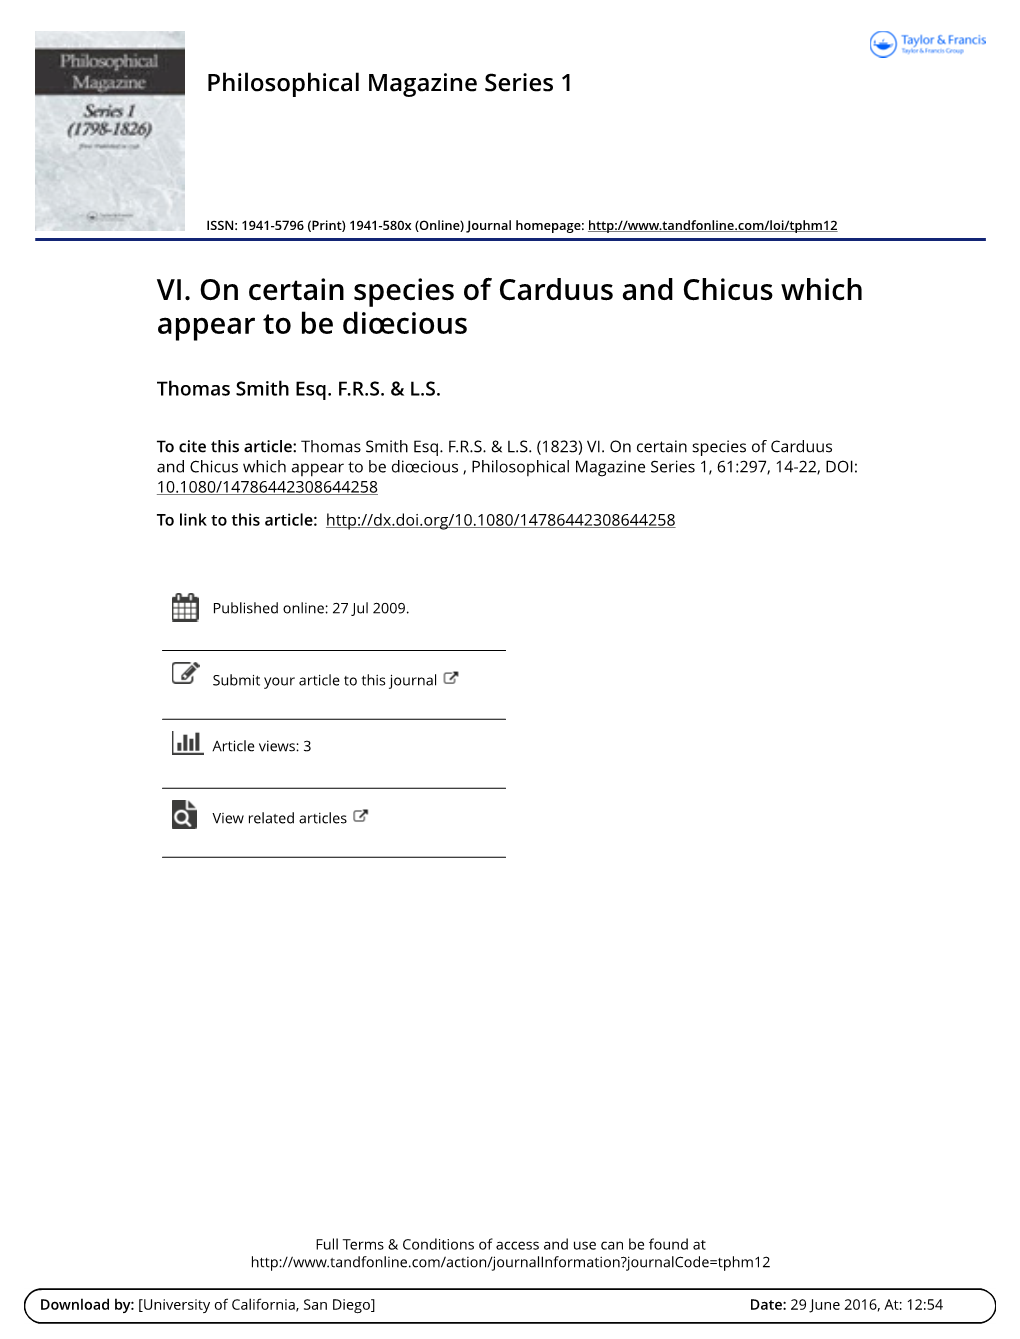 VI. on Certain Species of Carduus and Chicus Which Appear to Be Diœcious